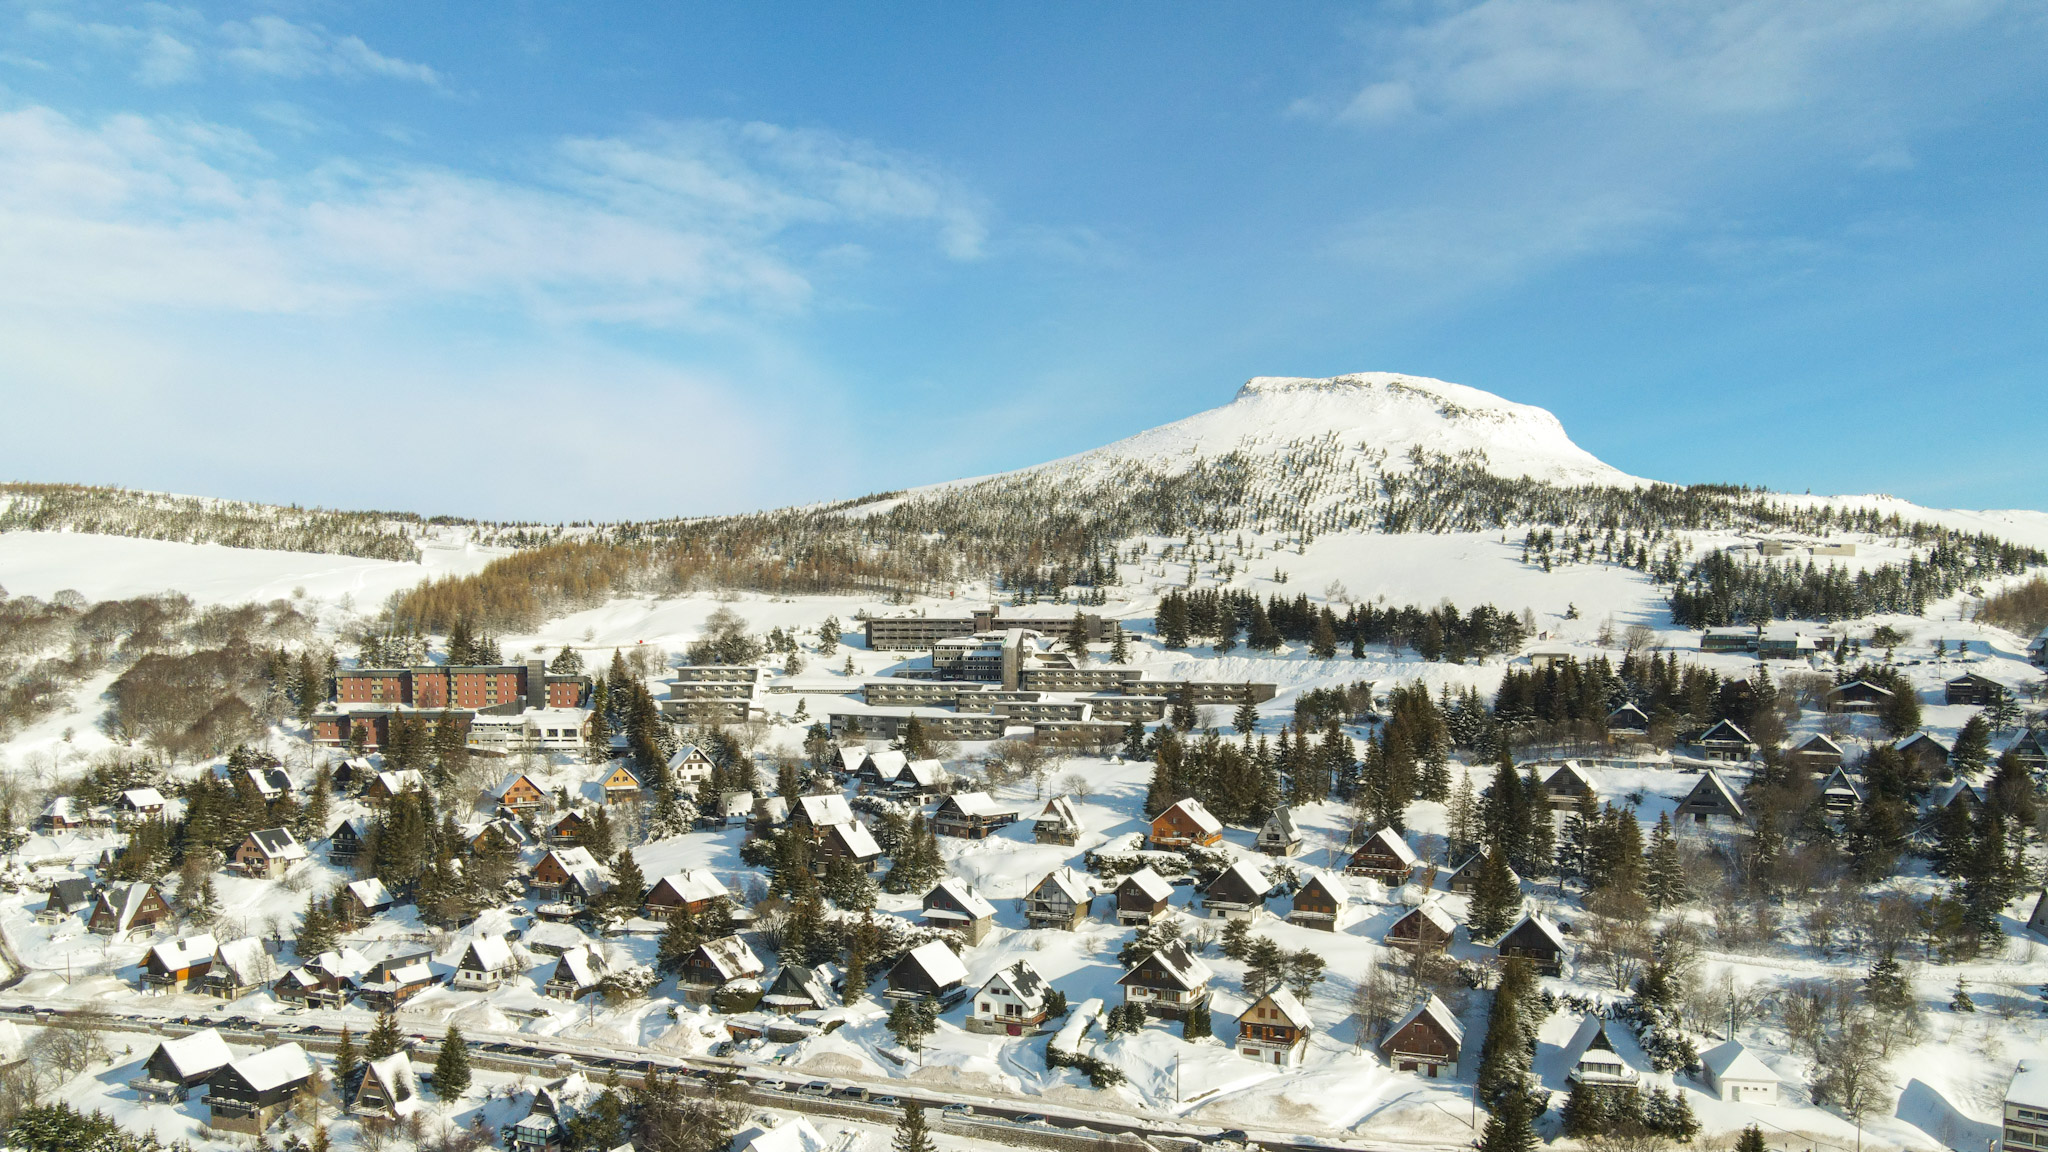 Super Besse seen from the sky, the village of chalets on the slopes of Puy du Chambourguet